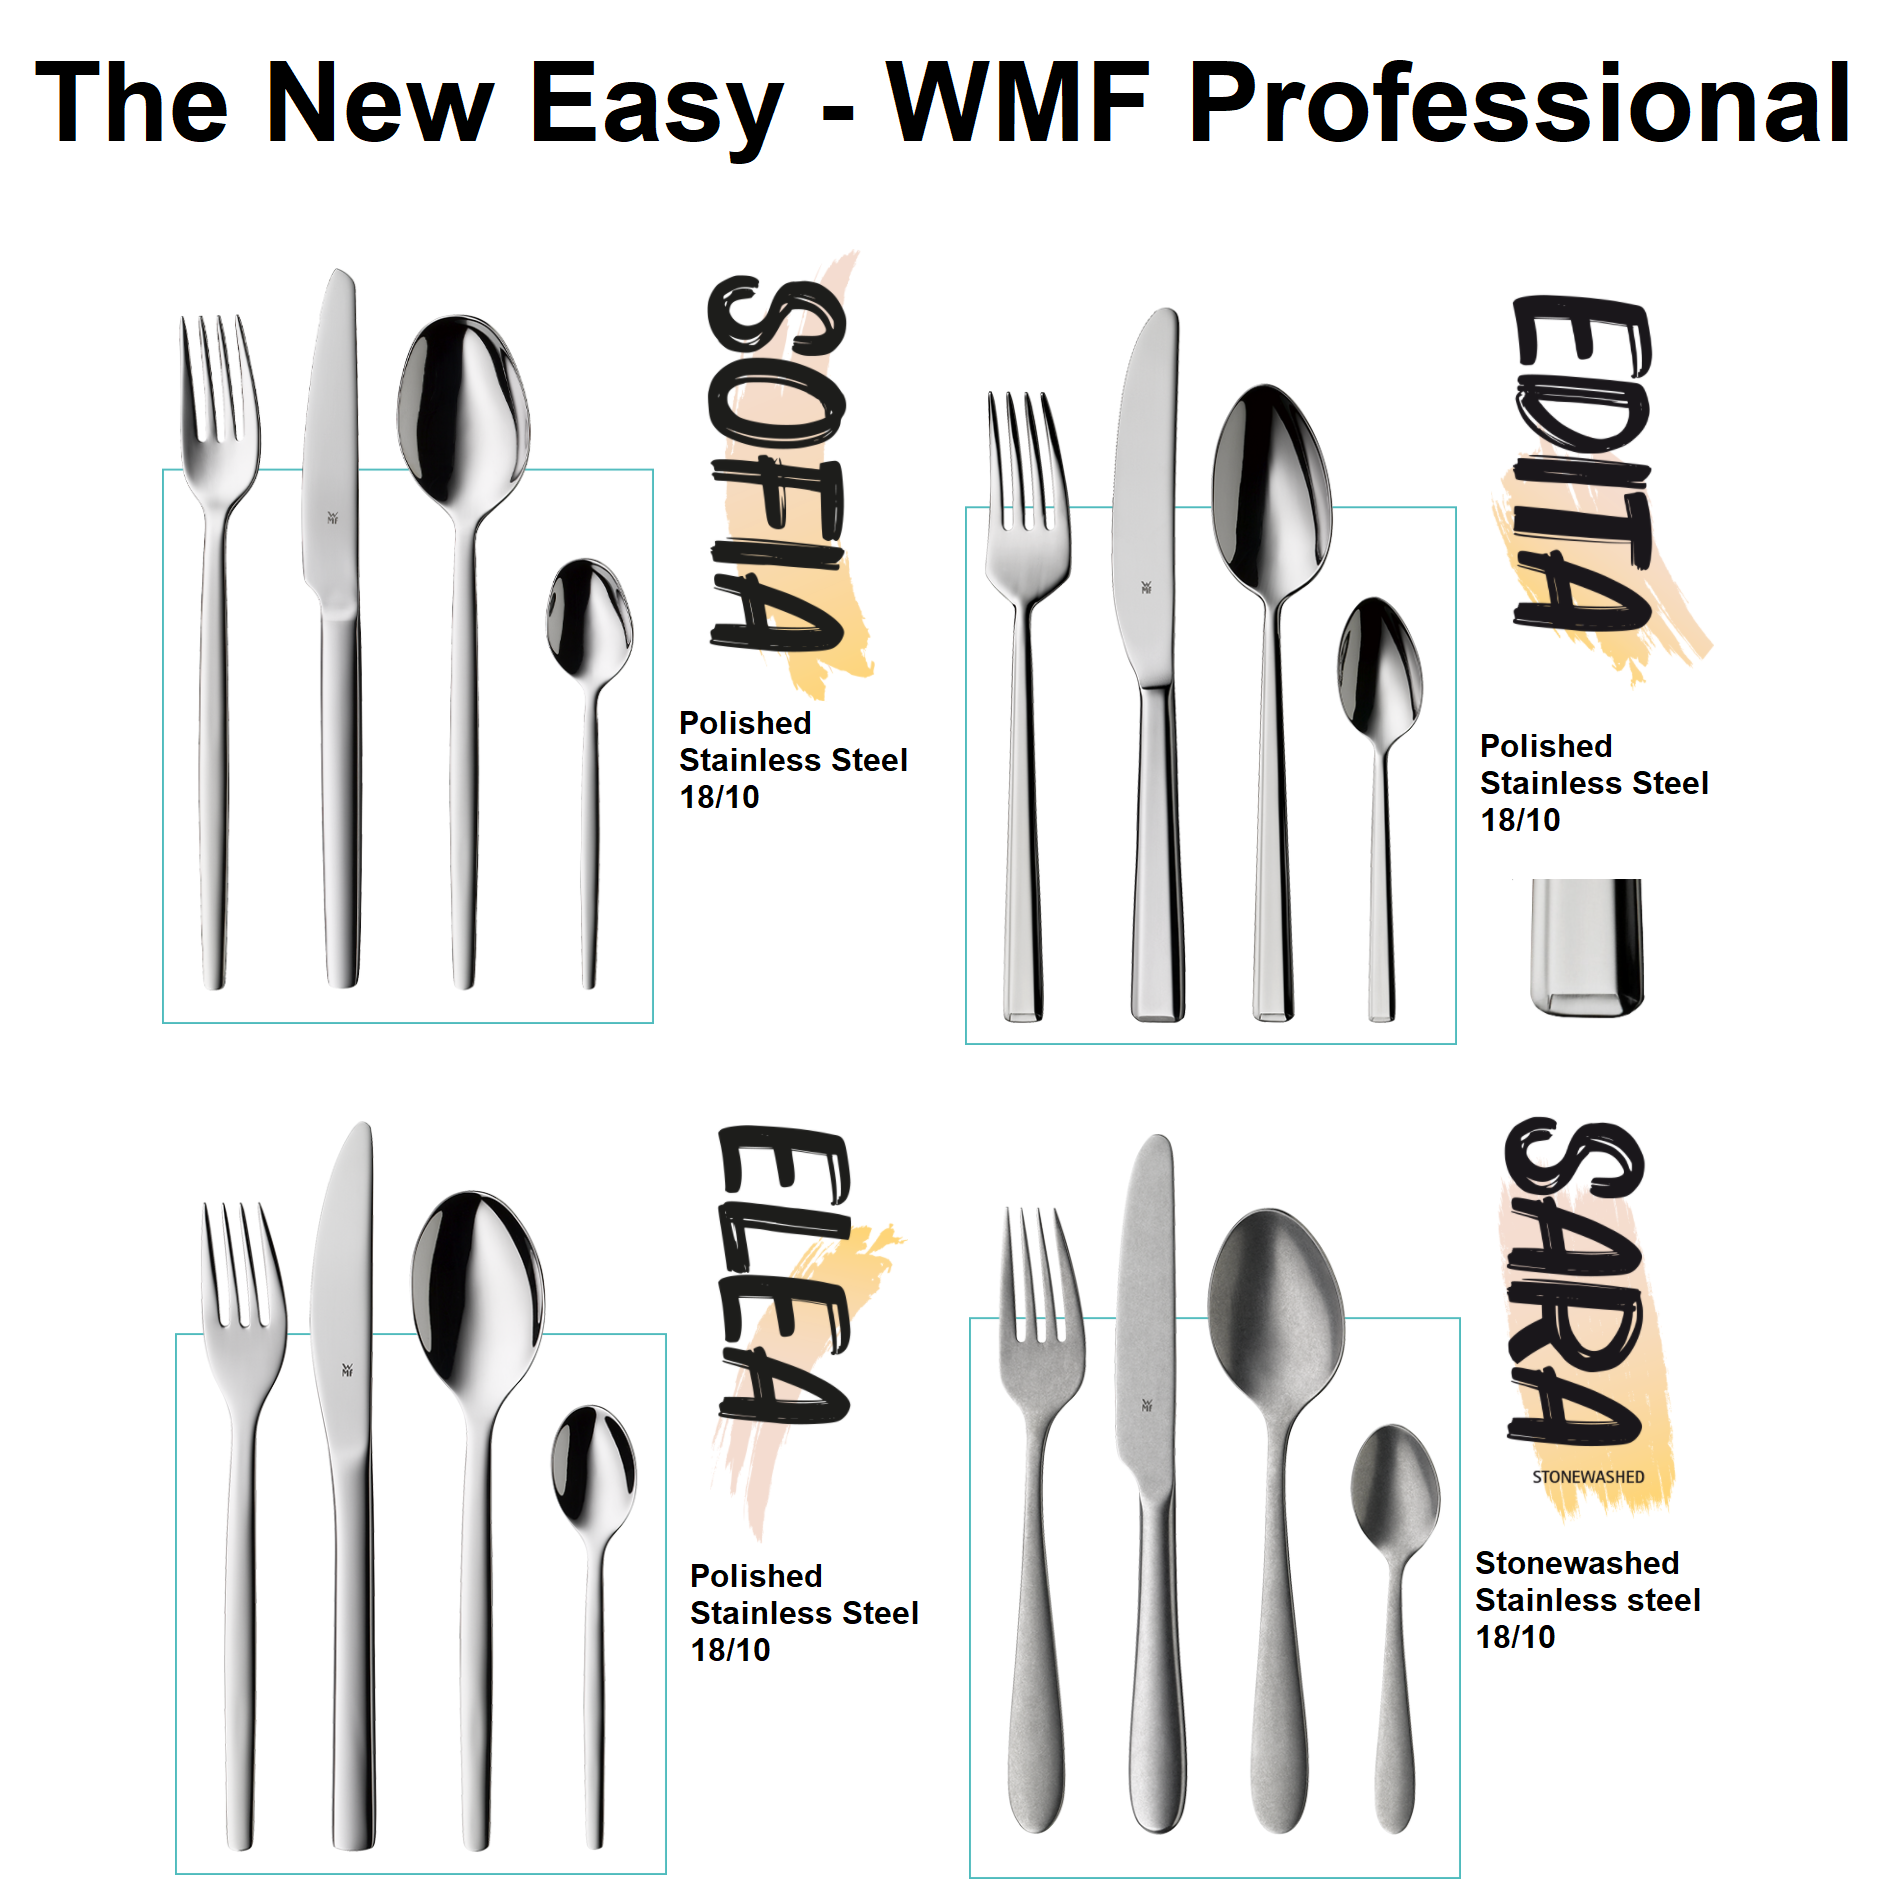 WMF - THE NEW EASY